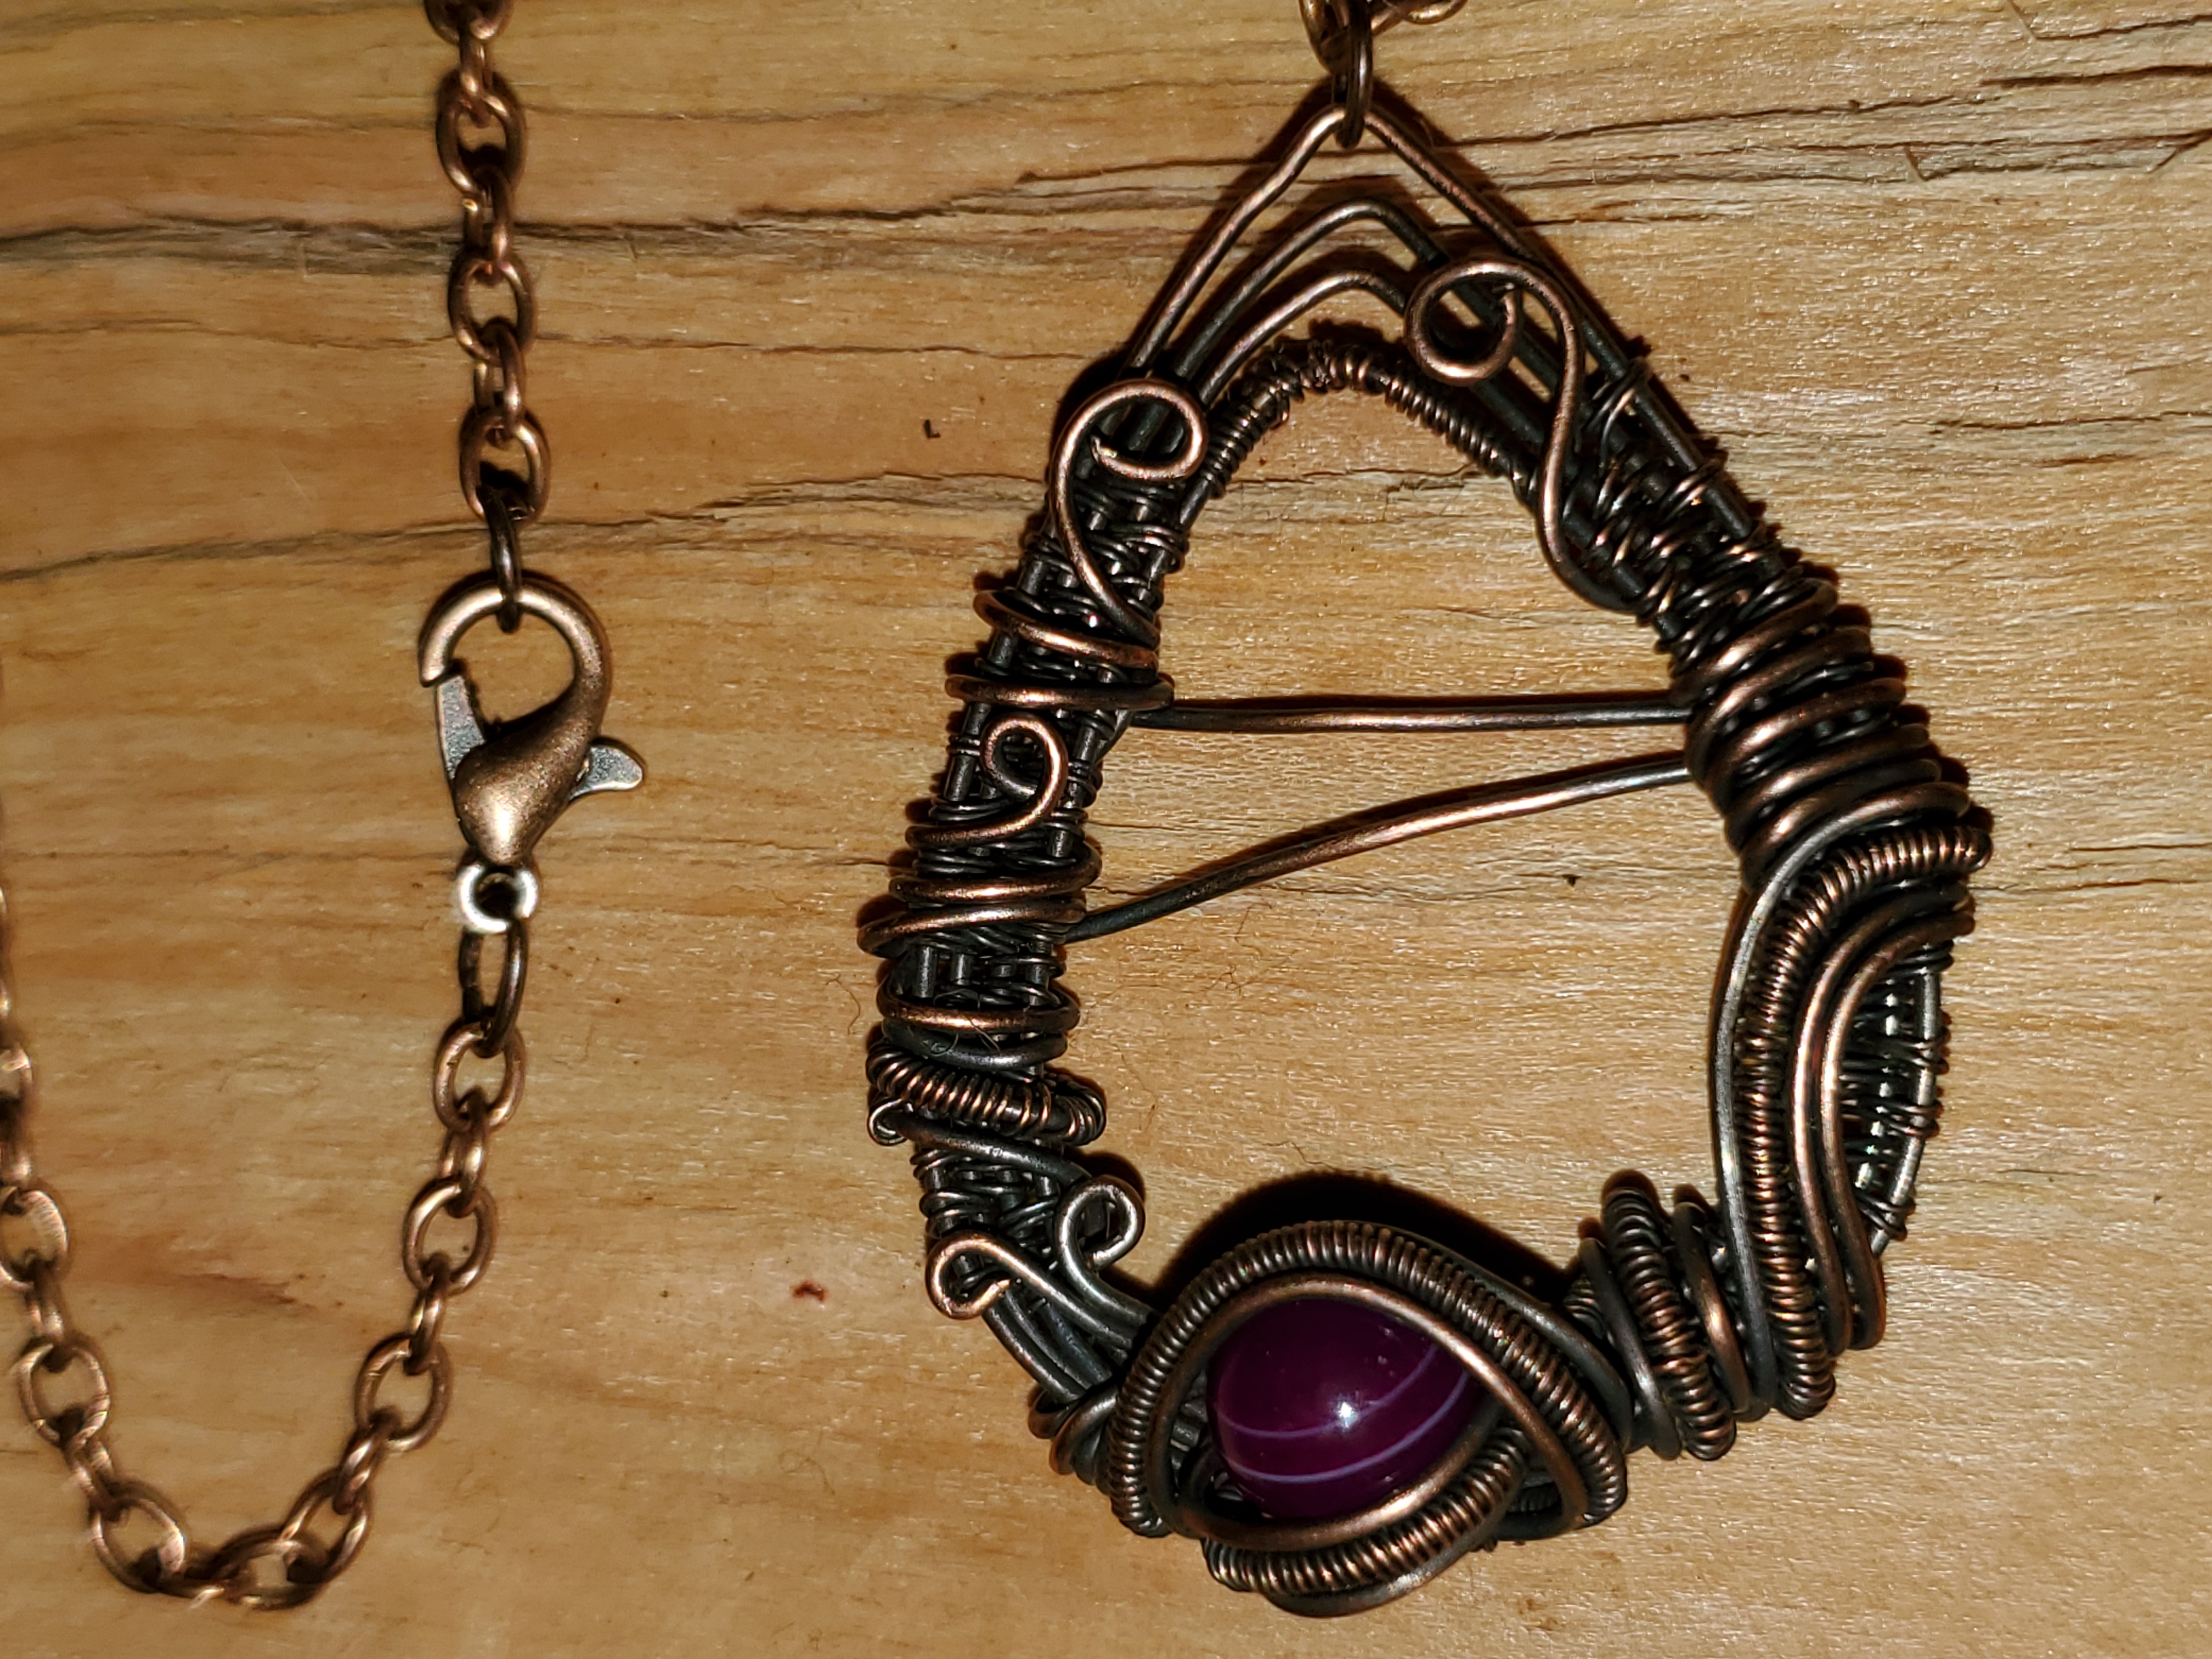 stripped agate, agate, purple, agate necklace, charm, pendant, amulet, crystal, crystal jewely, stone, stone jewelry, wire, copper wire, wire wrapped, necklace, spiritual, healing, semi precious, art, handcrafted, unique gift, magical pendant